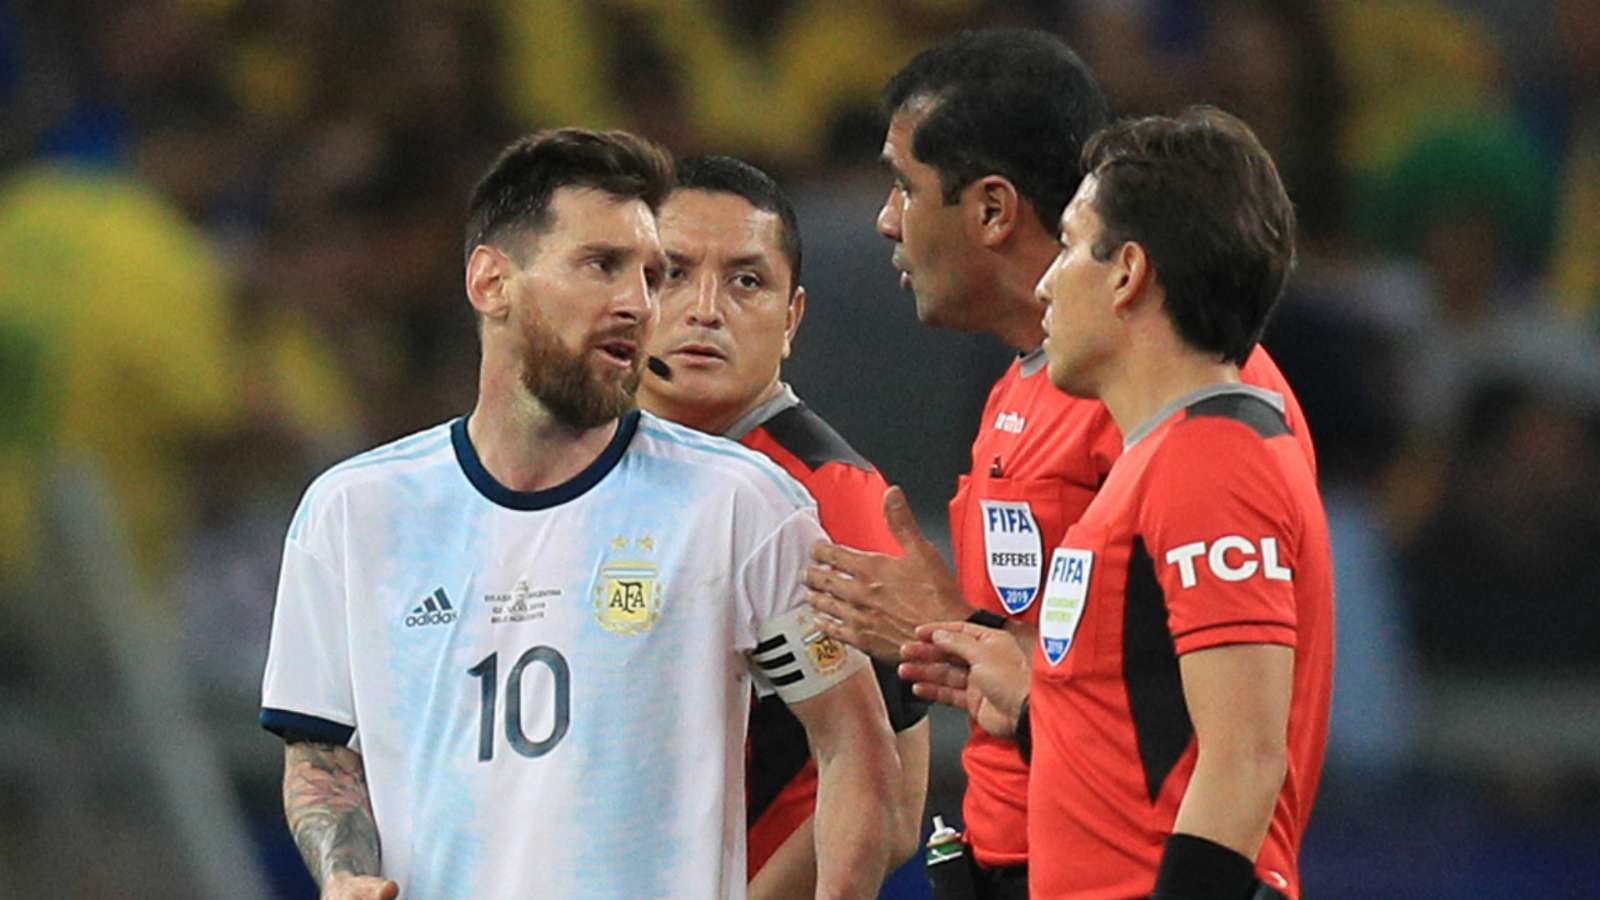 'It was bullsh*t!' - Messi accuses referees of favouring Brazil in Argentina's Copa America semi-final defeat - Bóng Đá